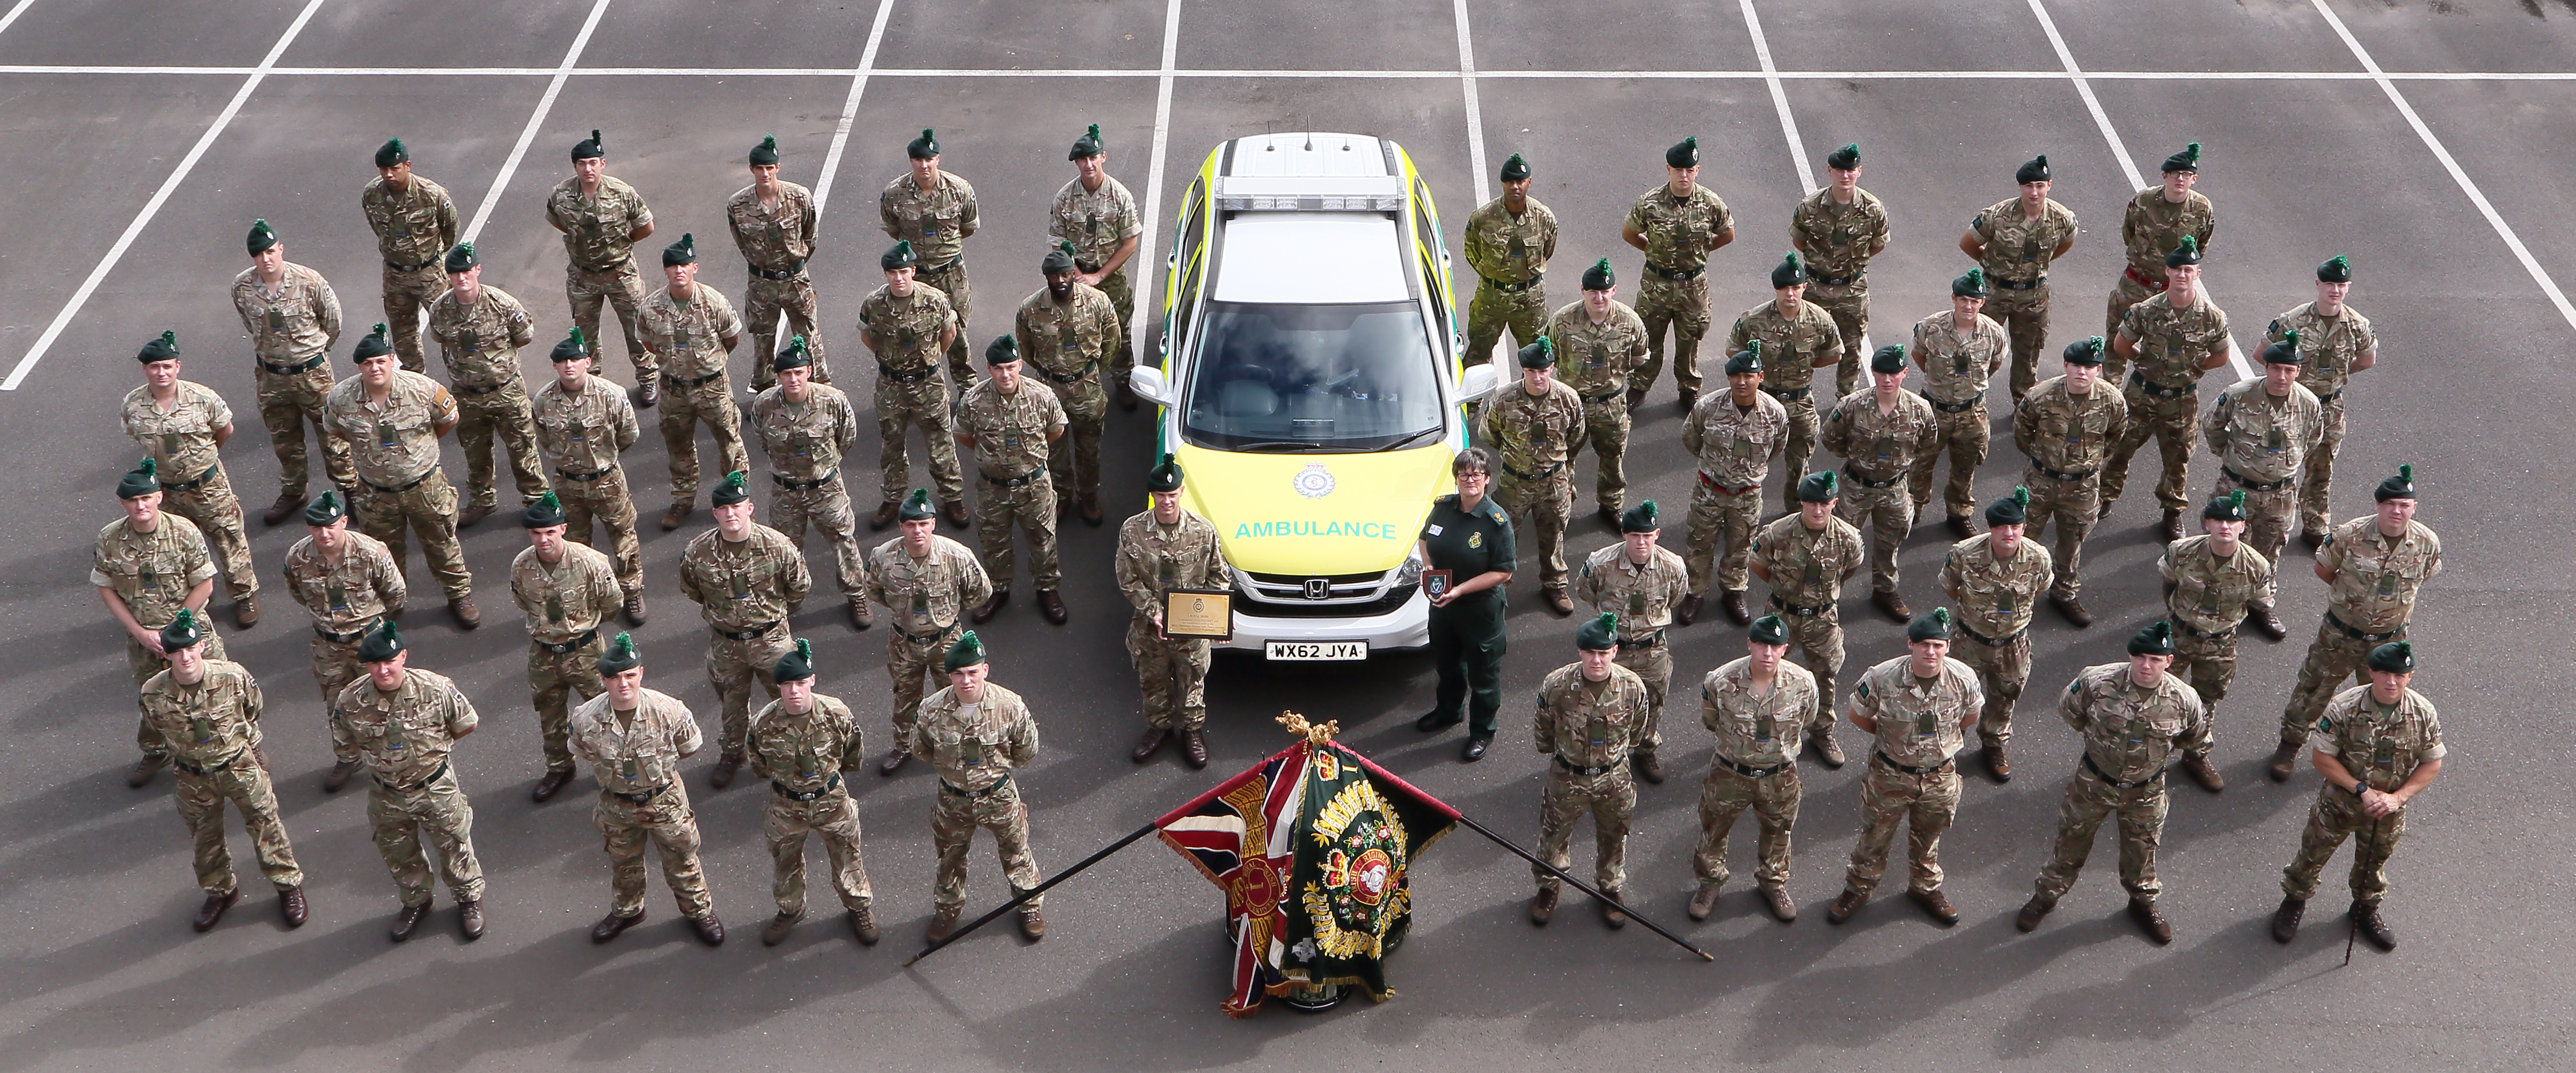 Ambulance Operations Manager Heather Ransom presents a commemorative plaque to the 1st Battalion Royal Irish Regiment at Shropshire’s Clive Barracks